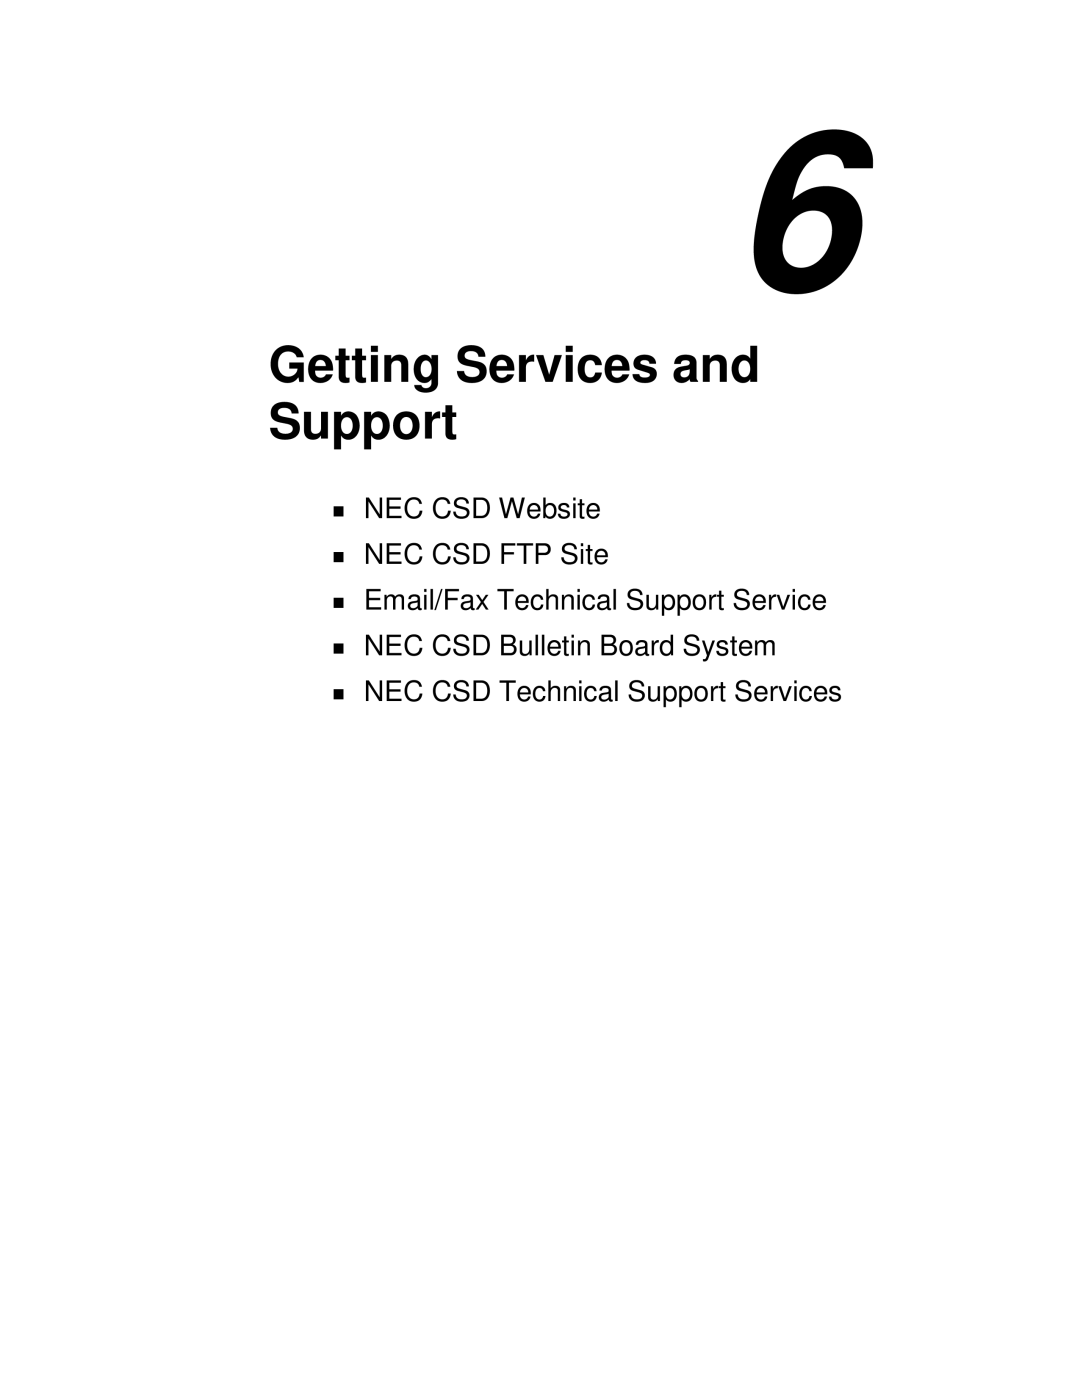 NEC VT 300 Series Getting Services and Support, NEC CSD Website NEC CSD FTP Site, Email/Fax Technical Support Service 